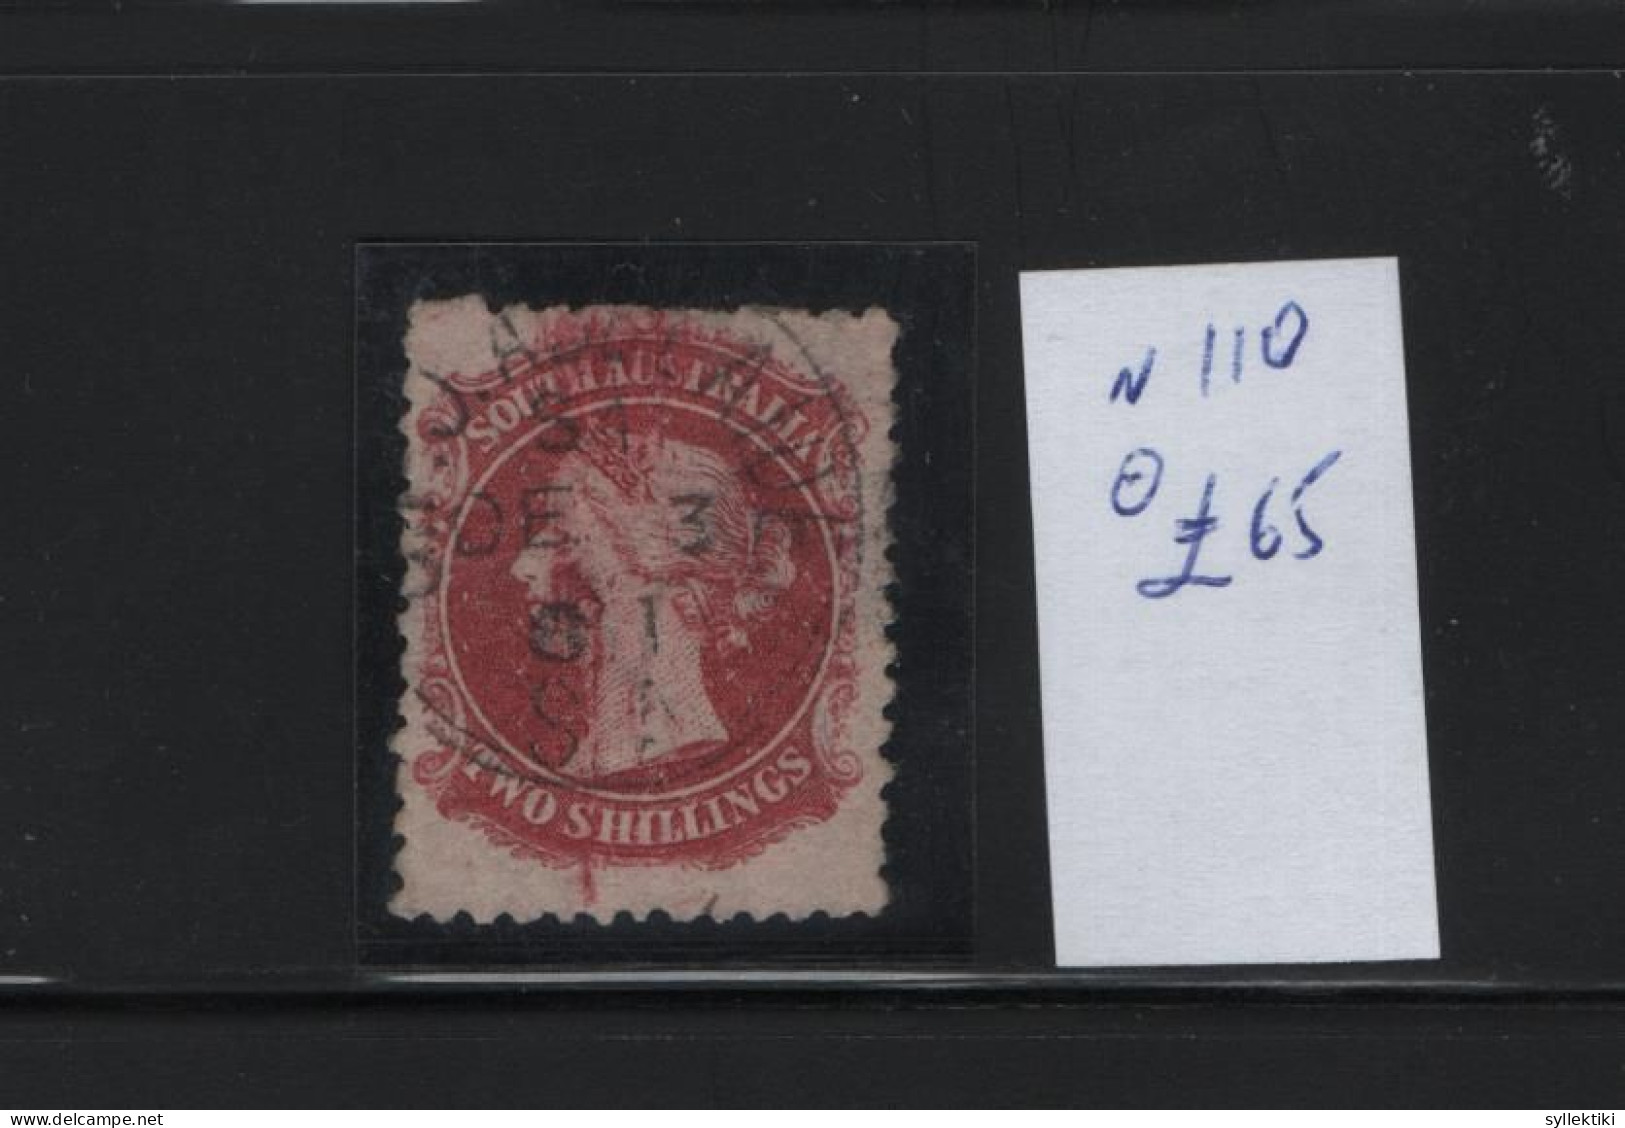 SOUTH AUSTRALIA  1870/73 2 SHILLINGS USED STAMP   STANLEY GIBBONS No 110 AND VALUE GBP 65.00 - Gebraucht